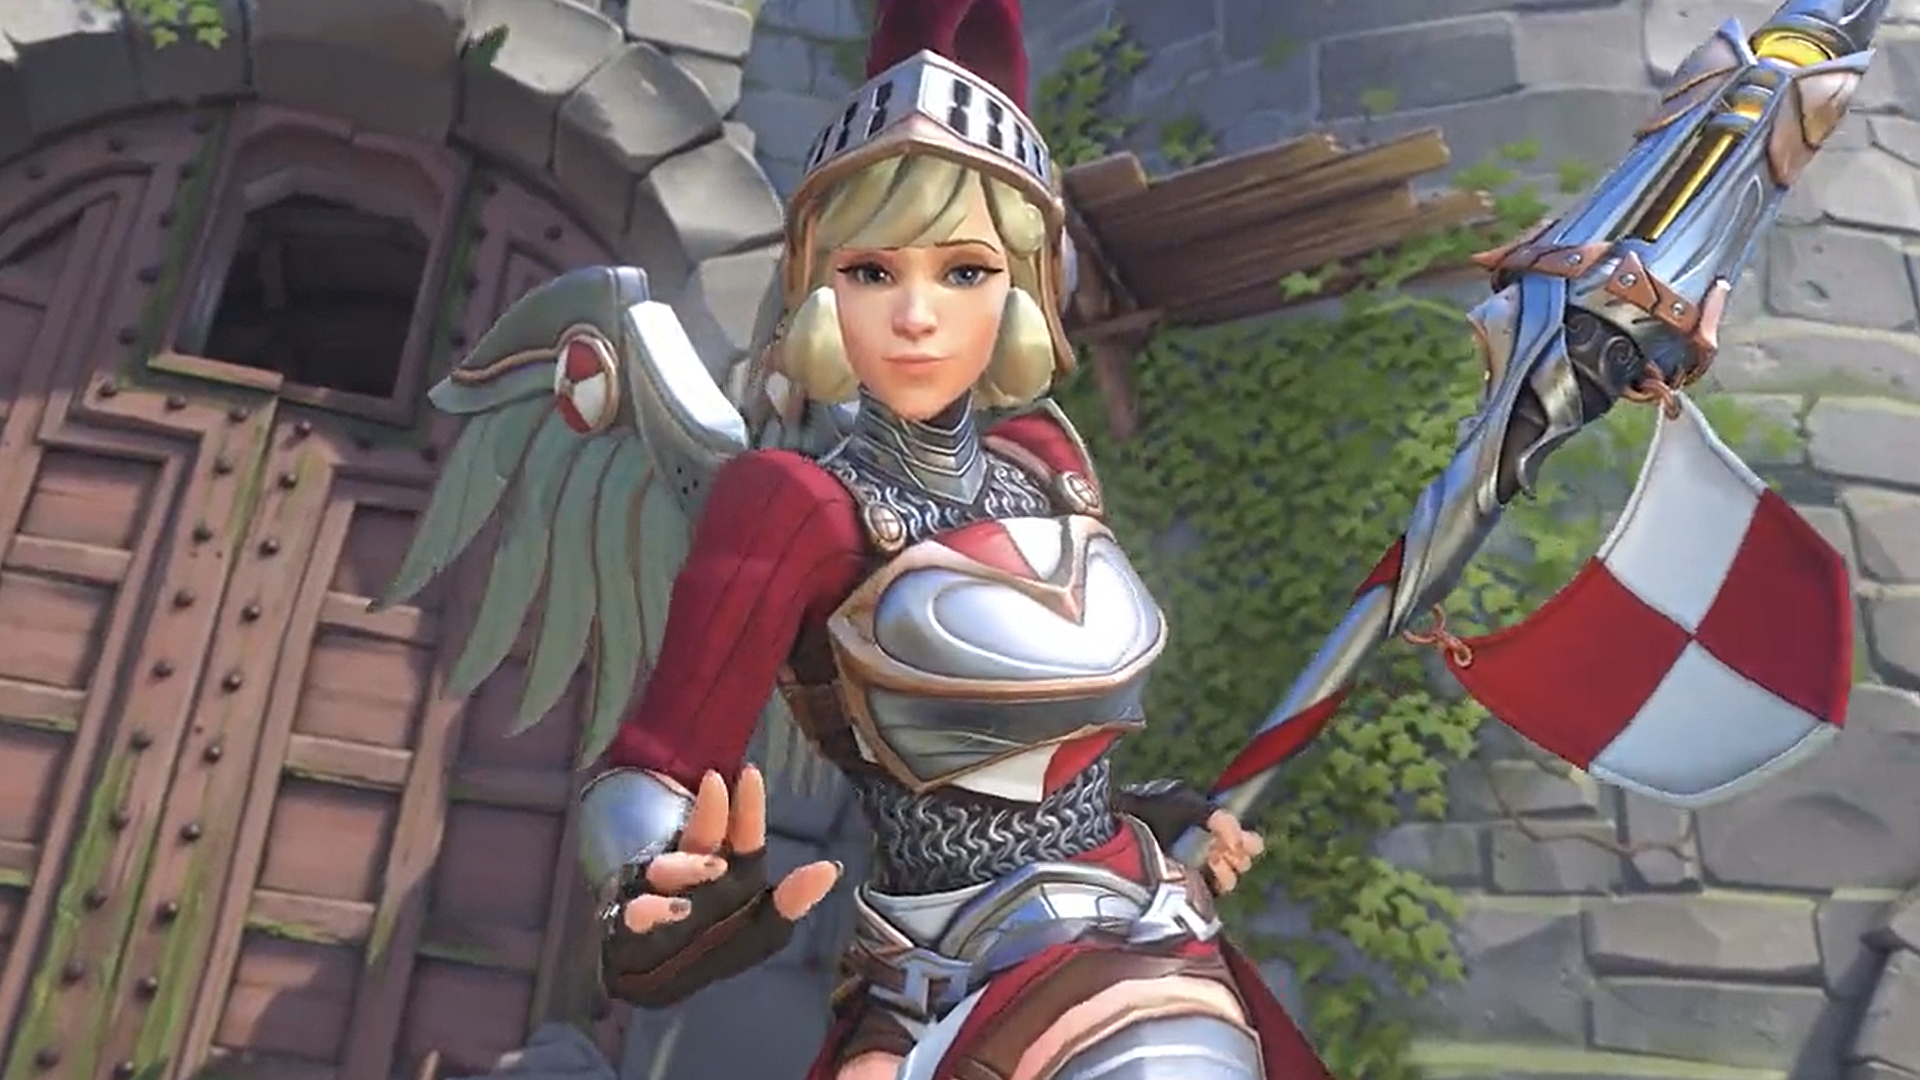 Overwatch players love the new Mercy skin, but want another character